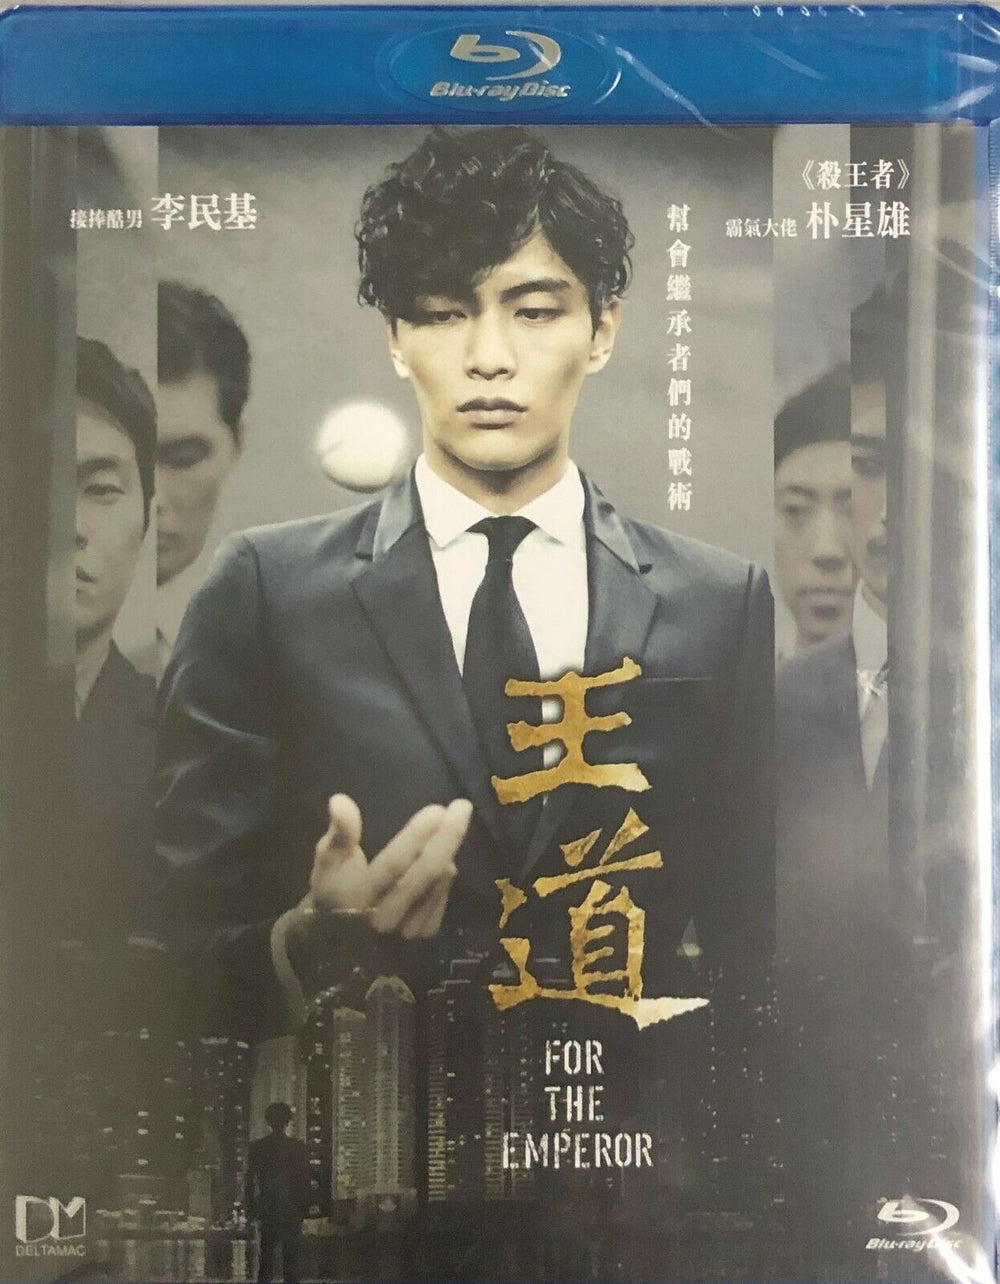 For The Emperor 王道 2014 (Korean Movie) BLU-RAY with English Subtitles (Region A)